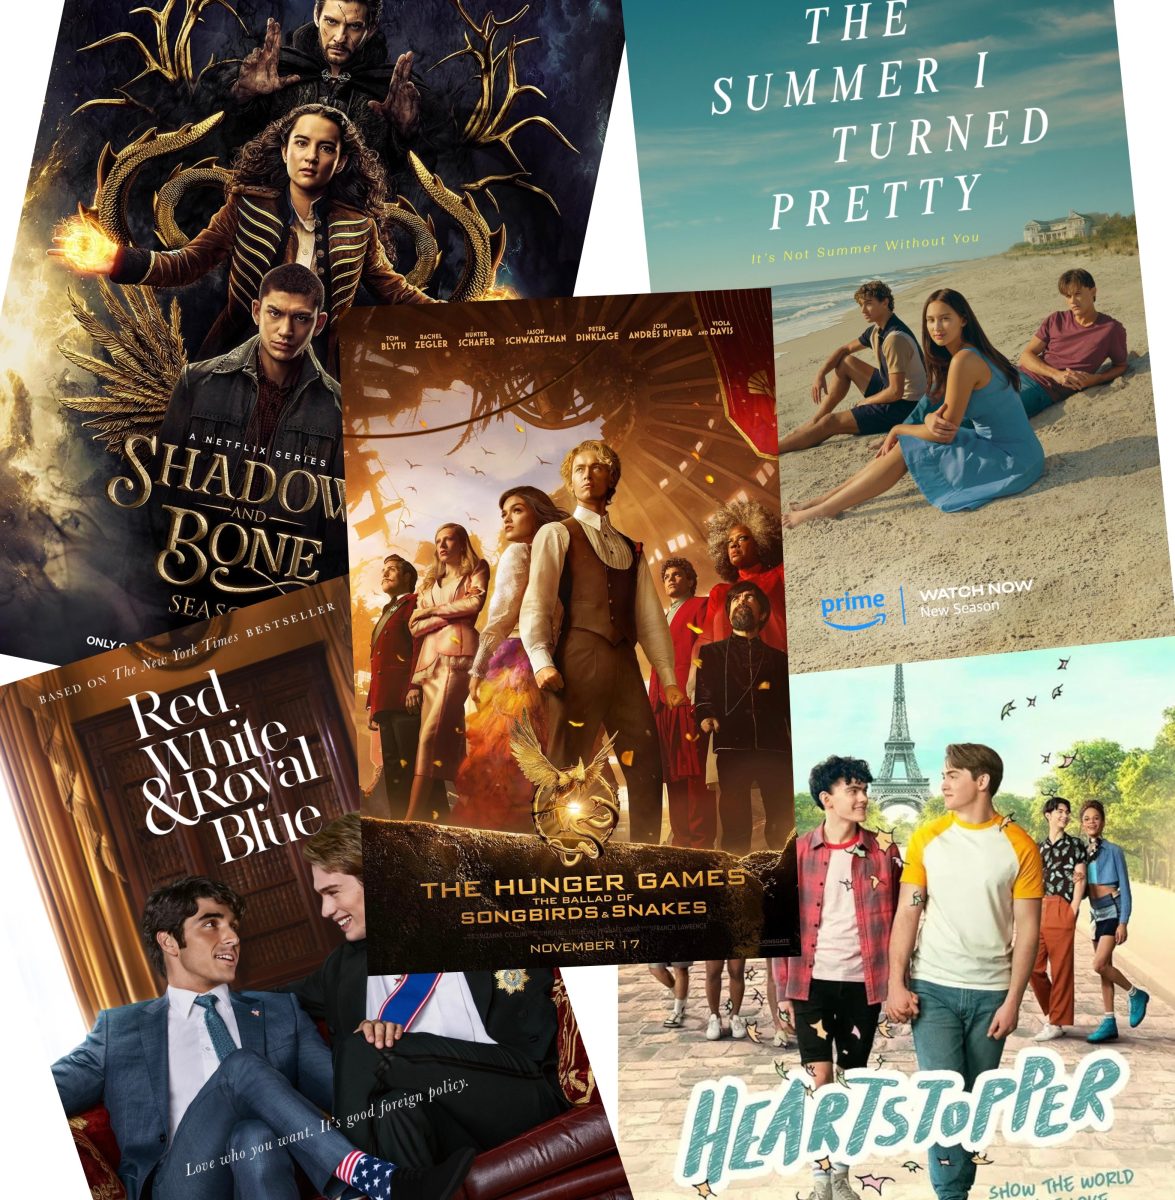 Movie posters of Shadow and Bone, The Summer I Turned Pretty, Red White & Royal Blue, Heartstopper and The Hunger Games The Ballad of Songbirds and Snakes, all of which are books turned to movies or TV shows released this year.